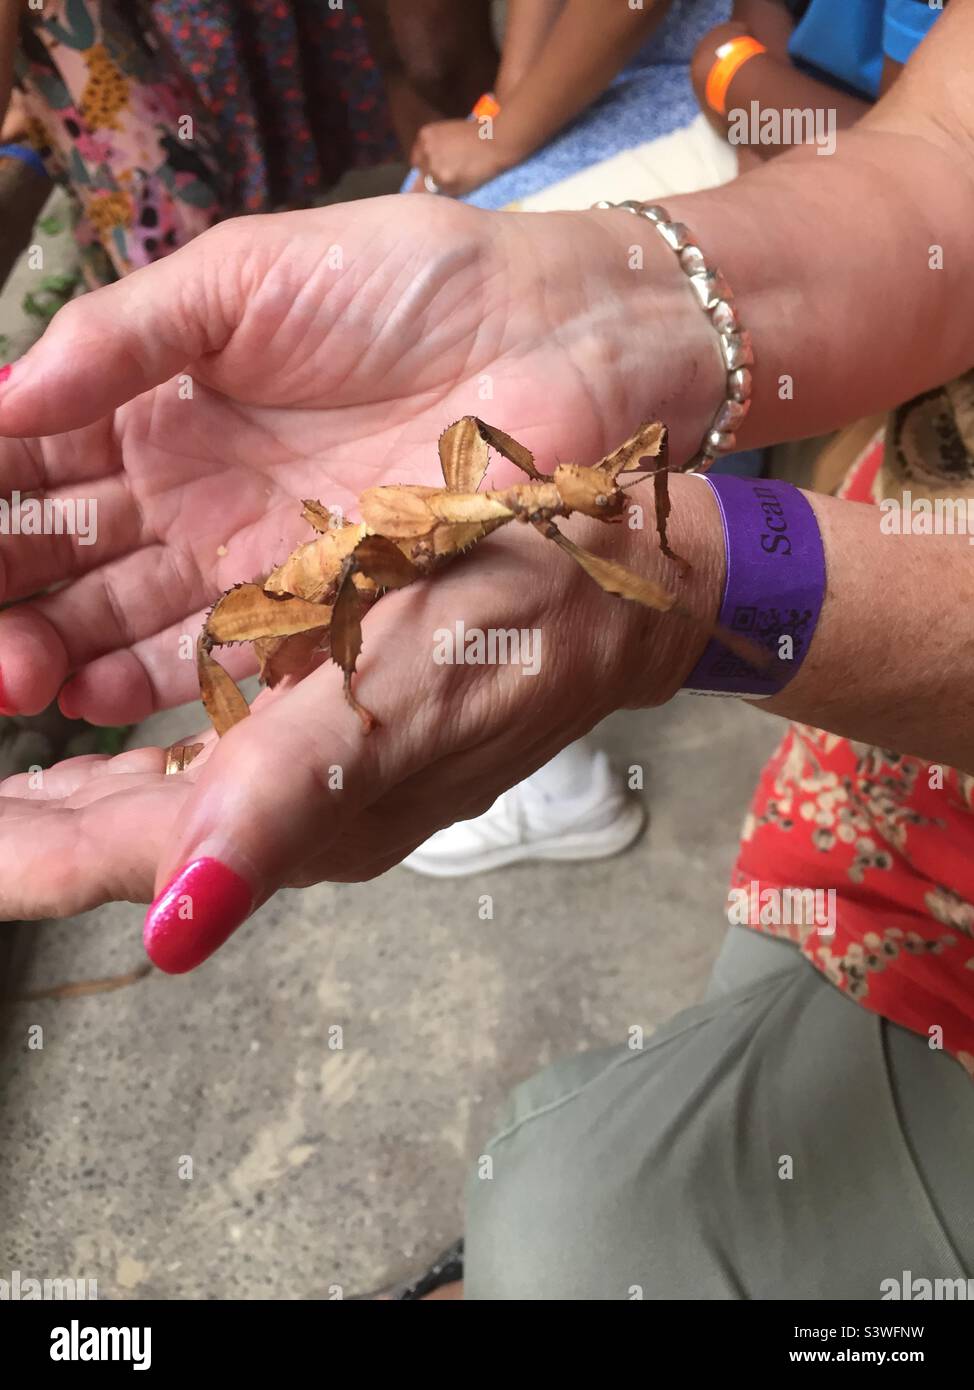 Woman holding a stick insect in her hands Stock Photo